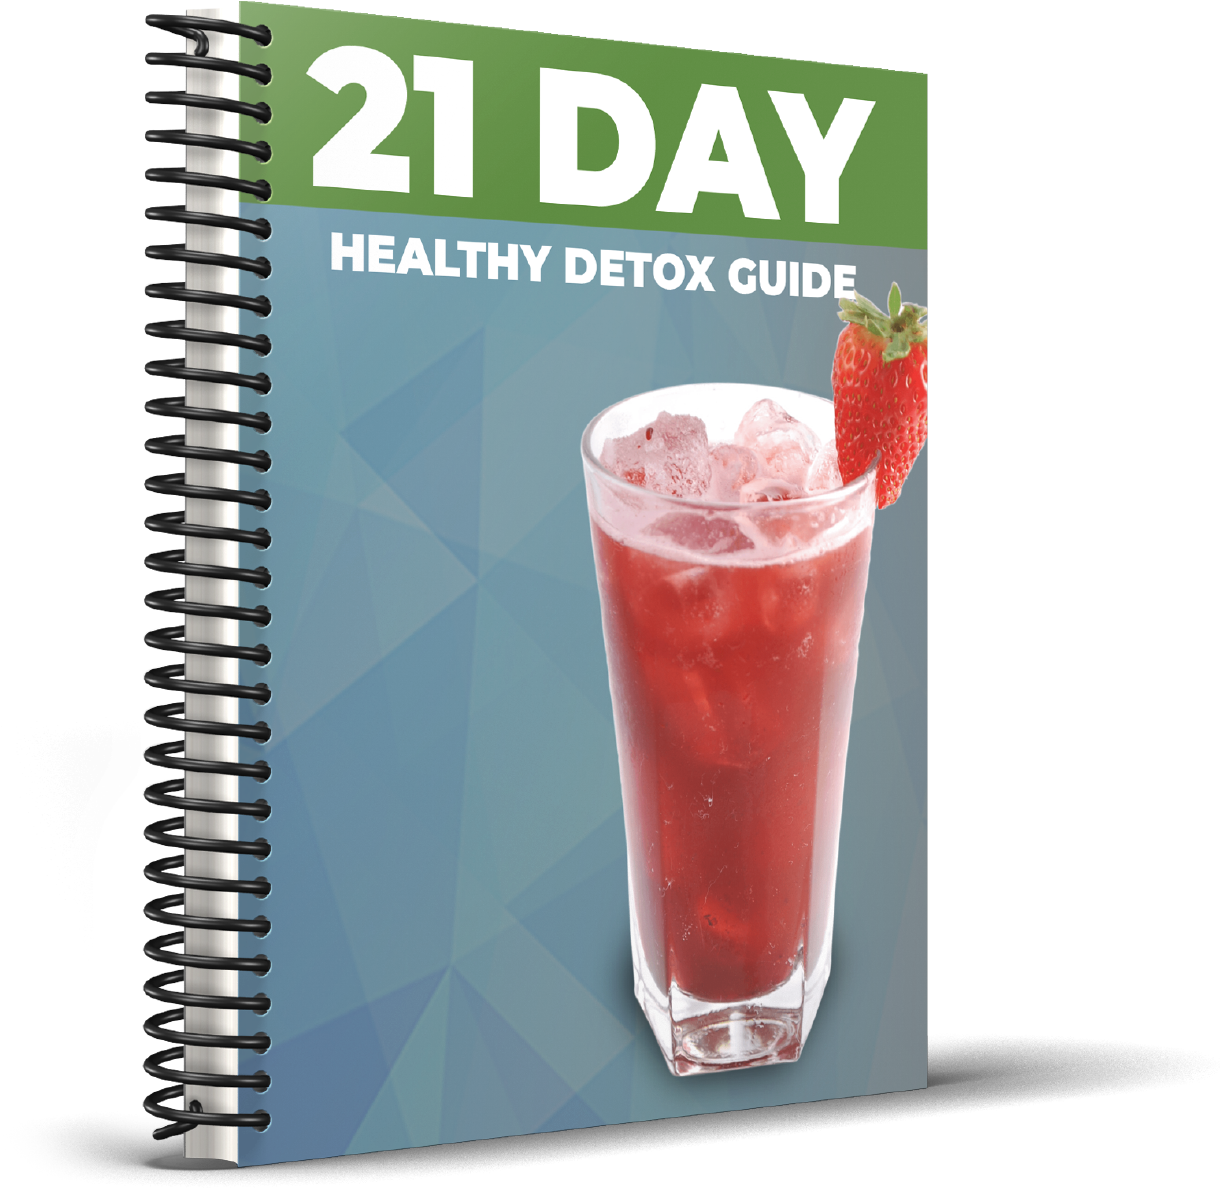 21 Day Healthy Detox Guide